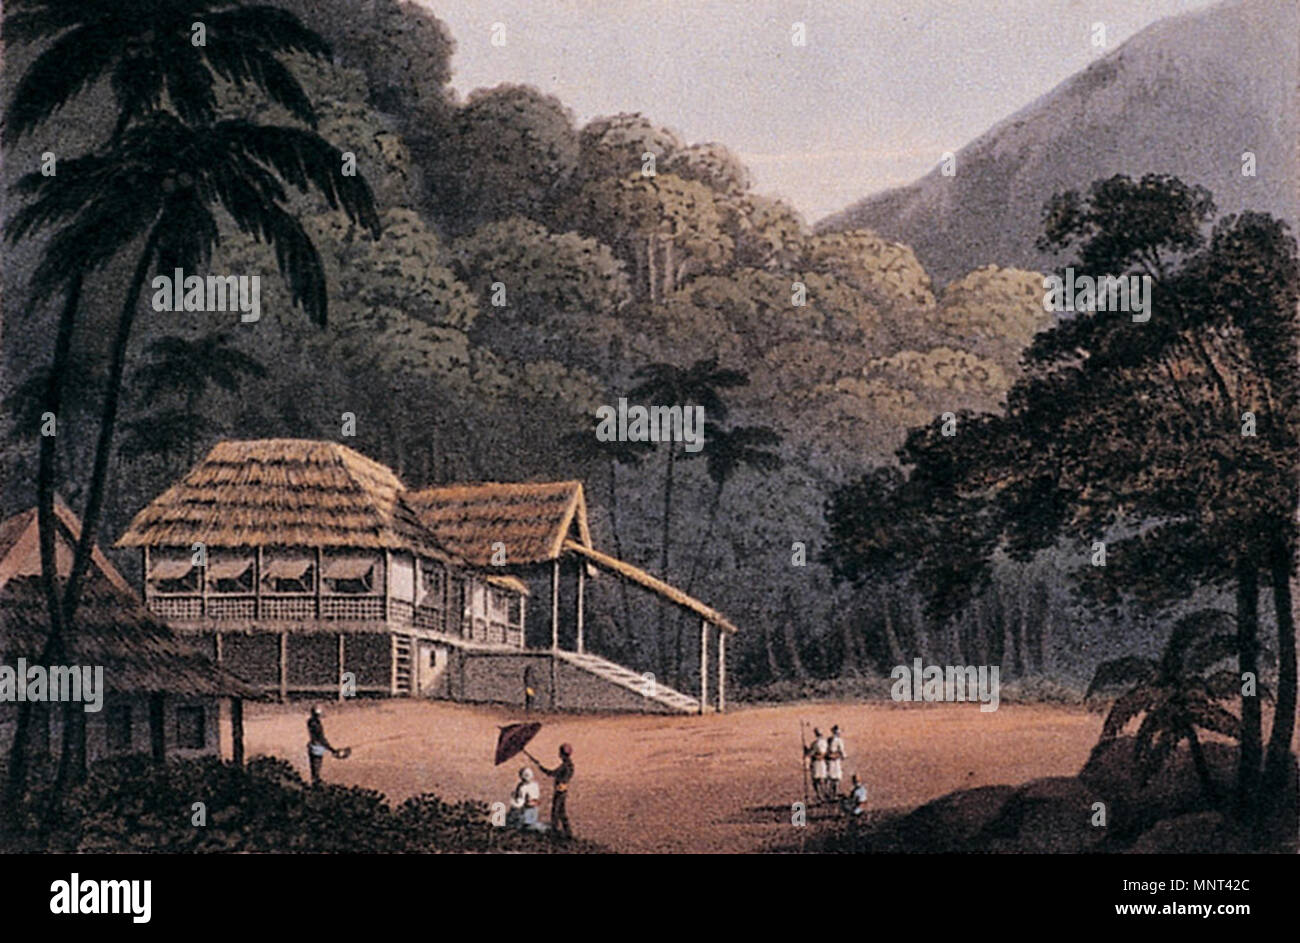 . English: Source: http://www.penangmuseum.gov.my/museum/sites/default/files/portfolio images/R199b.jpg Title: 'Mr Amee's House & Mill at Pulo Penang Media: Print 1814 Width: 218 mm (8.6 in) Height: 144 mm (5.7 in) Year of creation: 1811 . 1811. Penang State Museum and Art Gallery 972 Penang Museum historical painting R199b Stock Photo